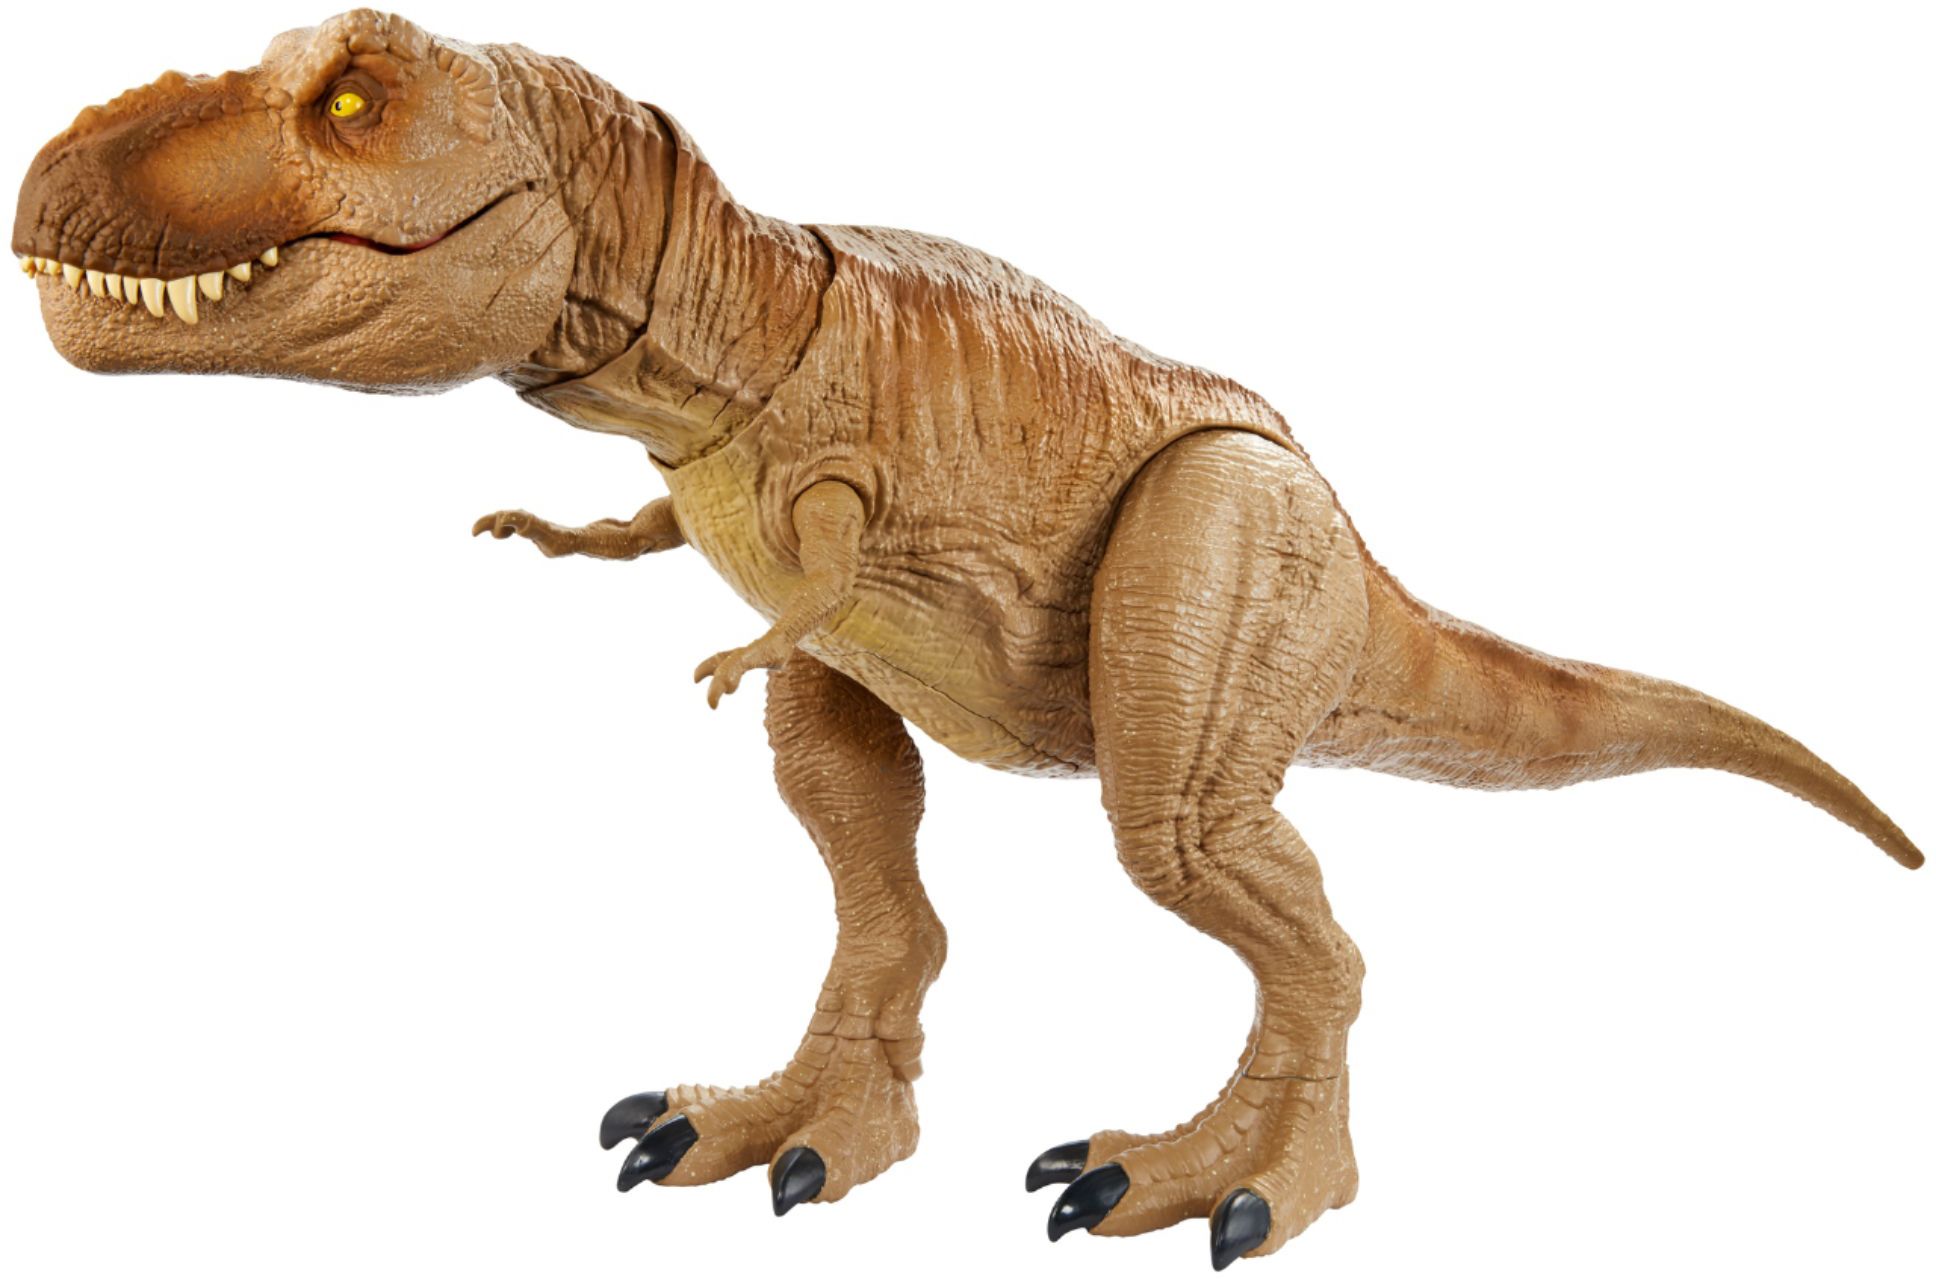 World Dinosaur Toy For Kids - Brown: Buy Online at Best Price in